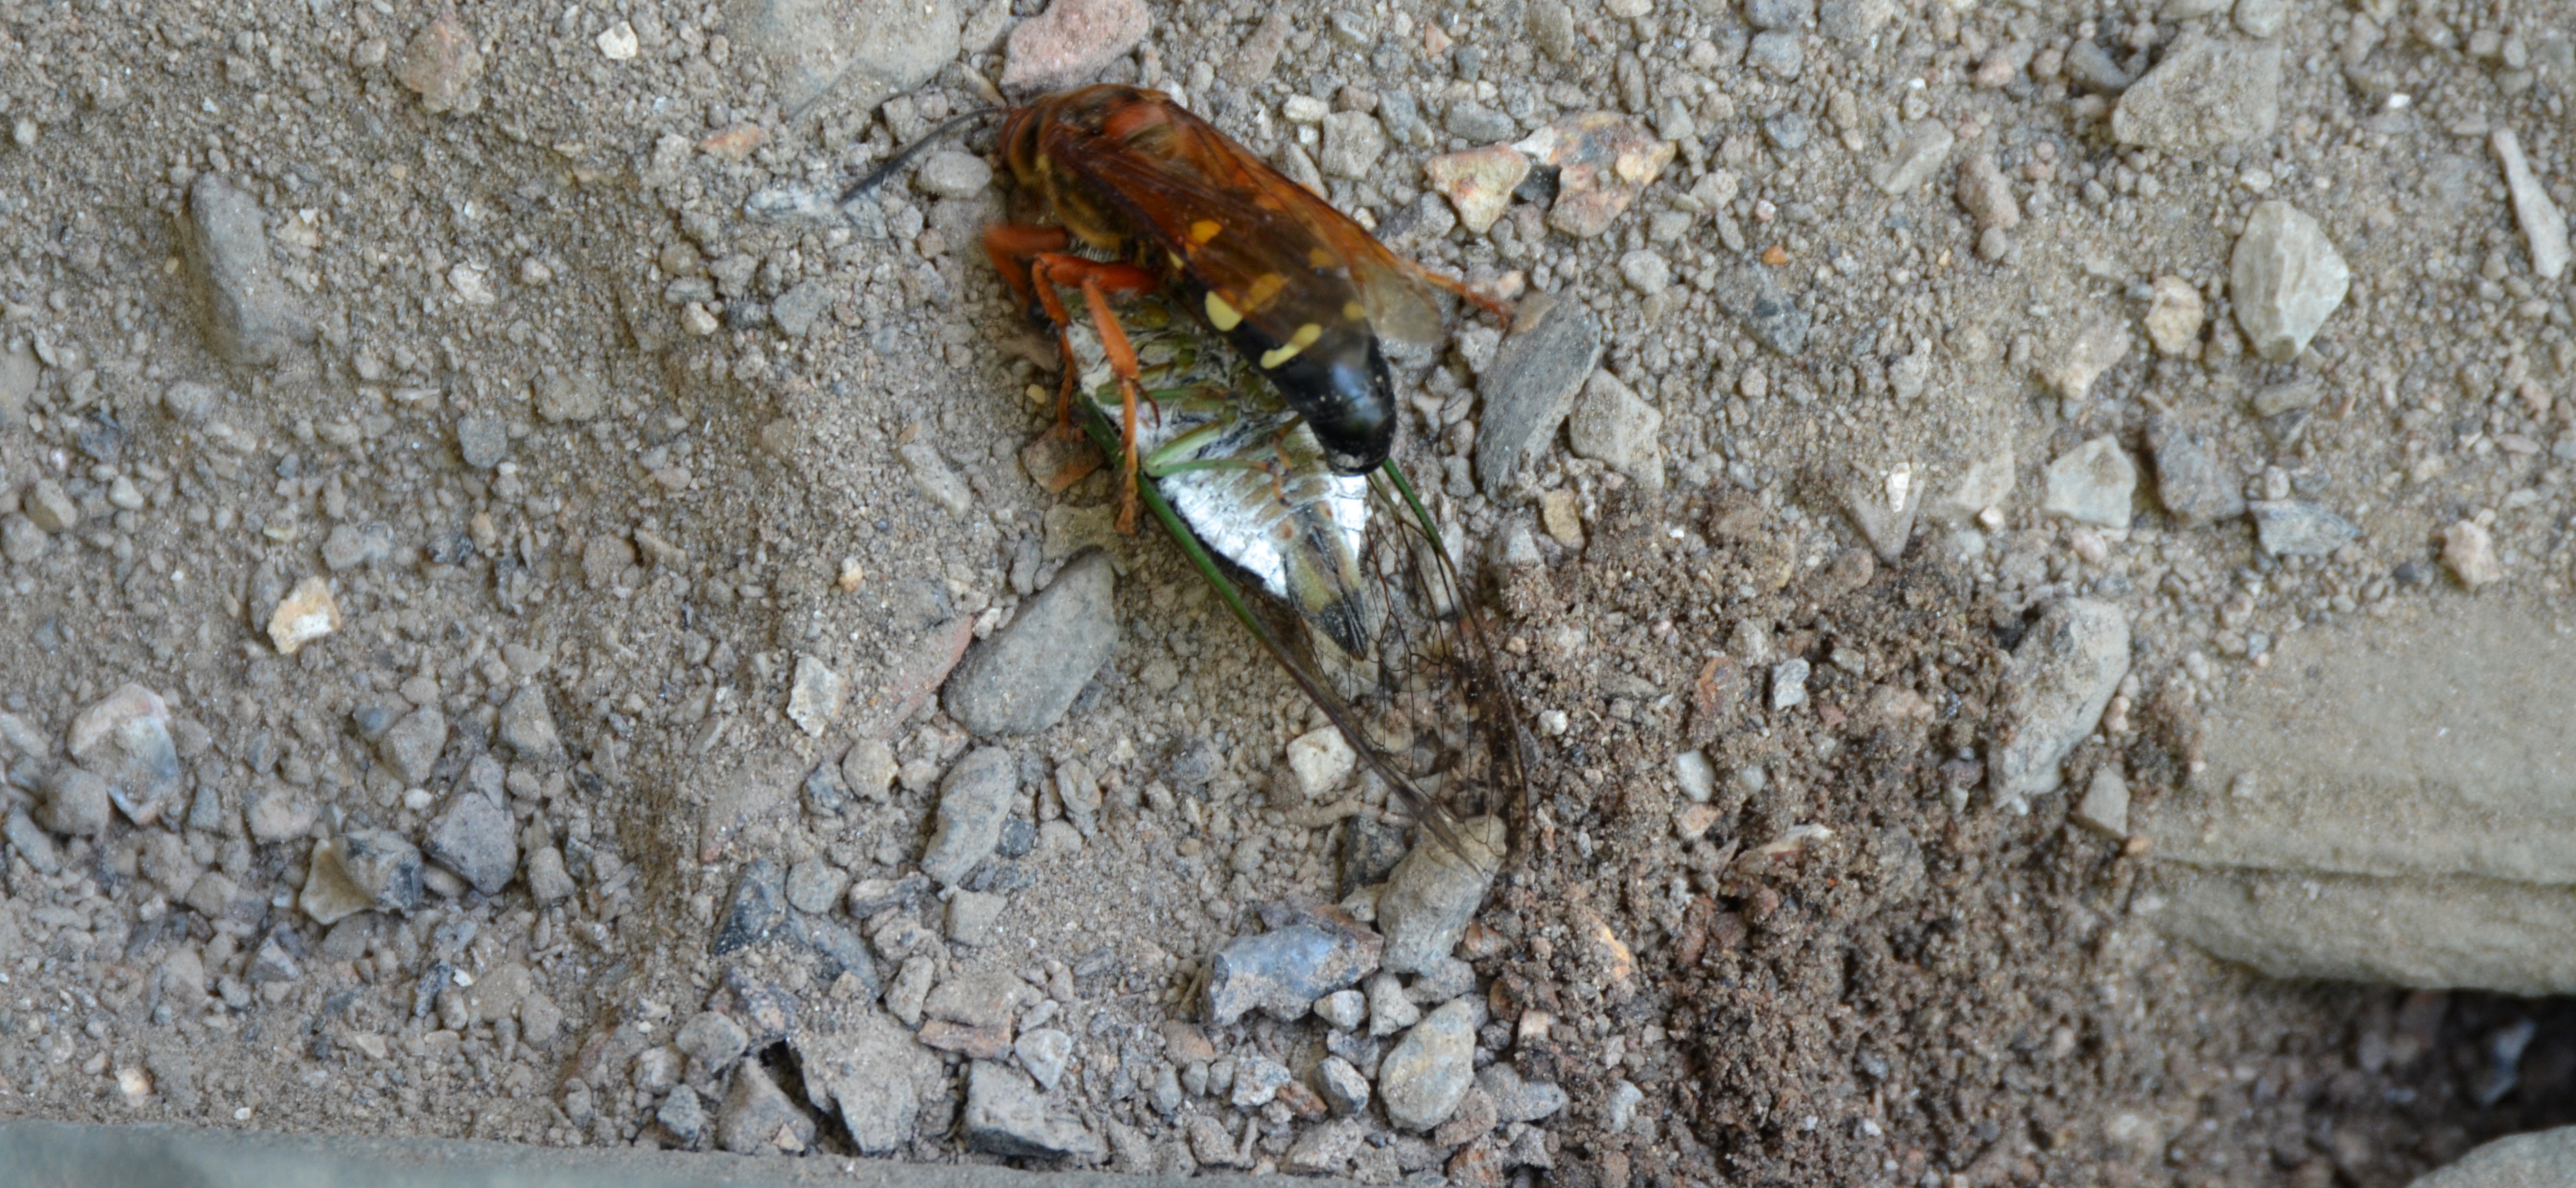 Tackling the Cicada and trying to get a grip on it